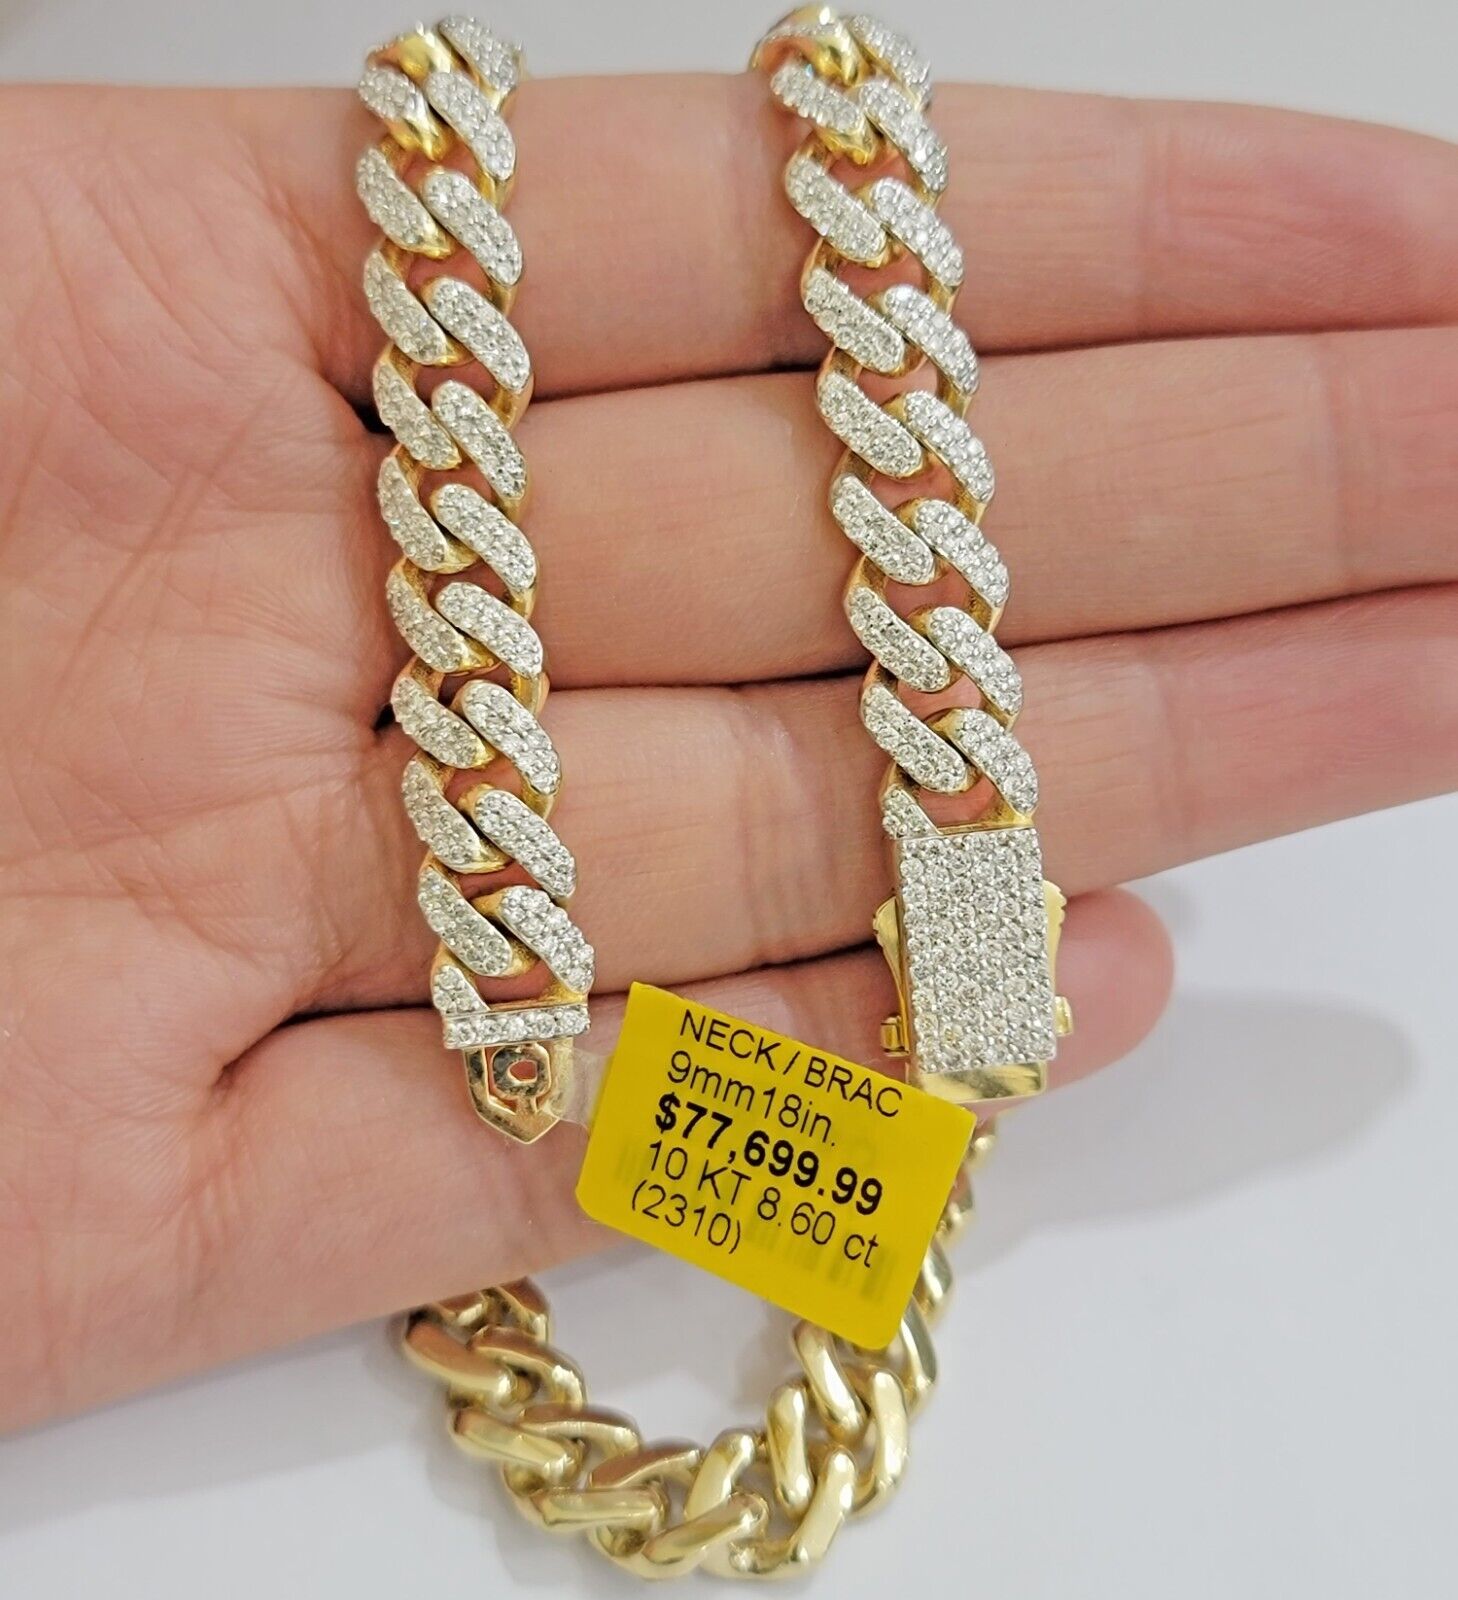 10k Yellow Gold Diamond Chain 18 Inch Necklace 9mm REAL 8.50 CT Dia, MENS CHOKER